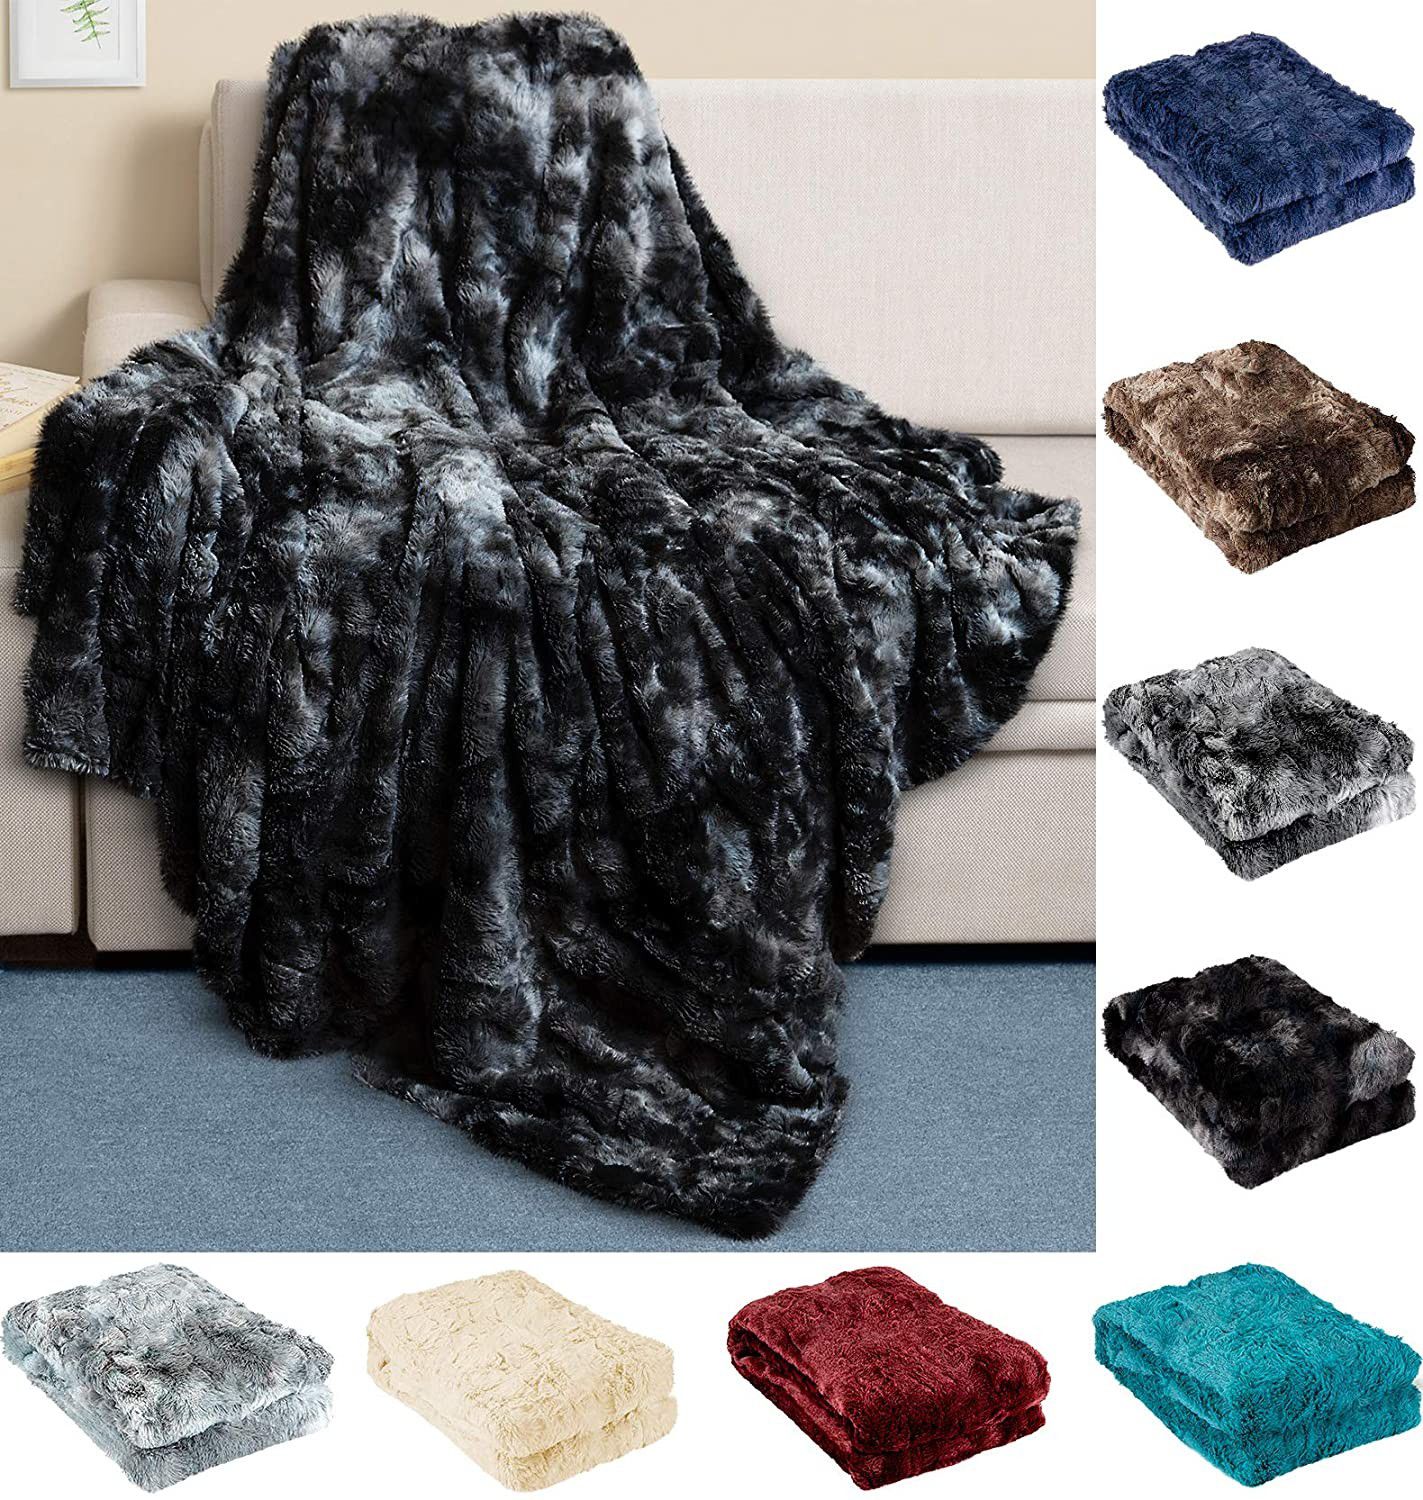 Luxury Faux Fur Throw Blanket - Ultra Soft and Fluffy - Plush for Couch Bed and Living Room - Fall Winter and Spring - 50x65 (Full Size) Black